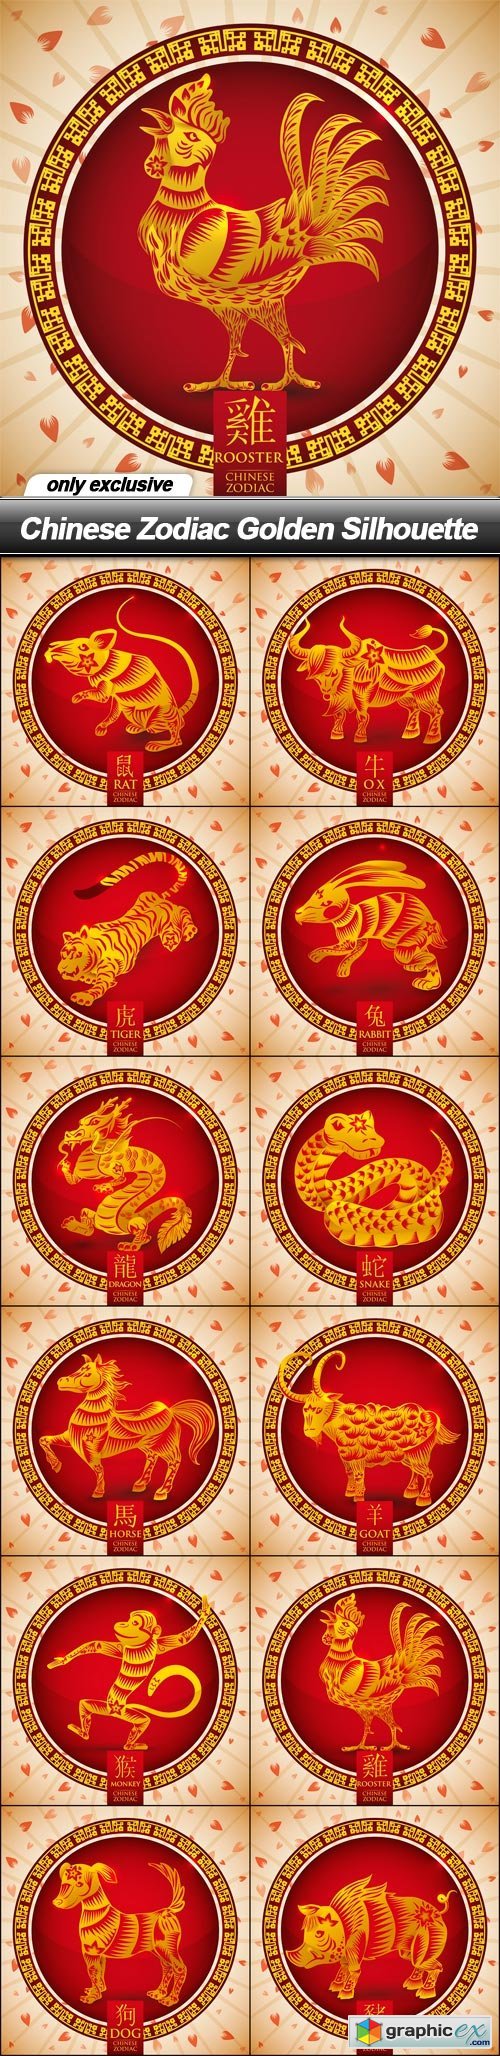 Chinese Zodiac Golden Silhouette - 12 EPS